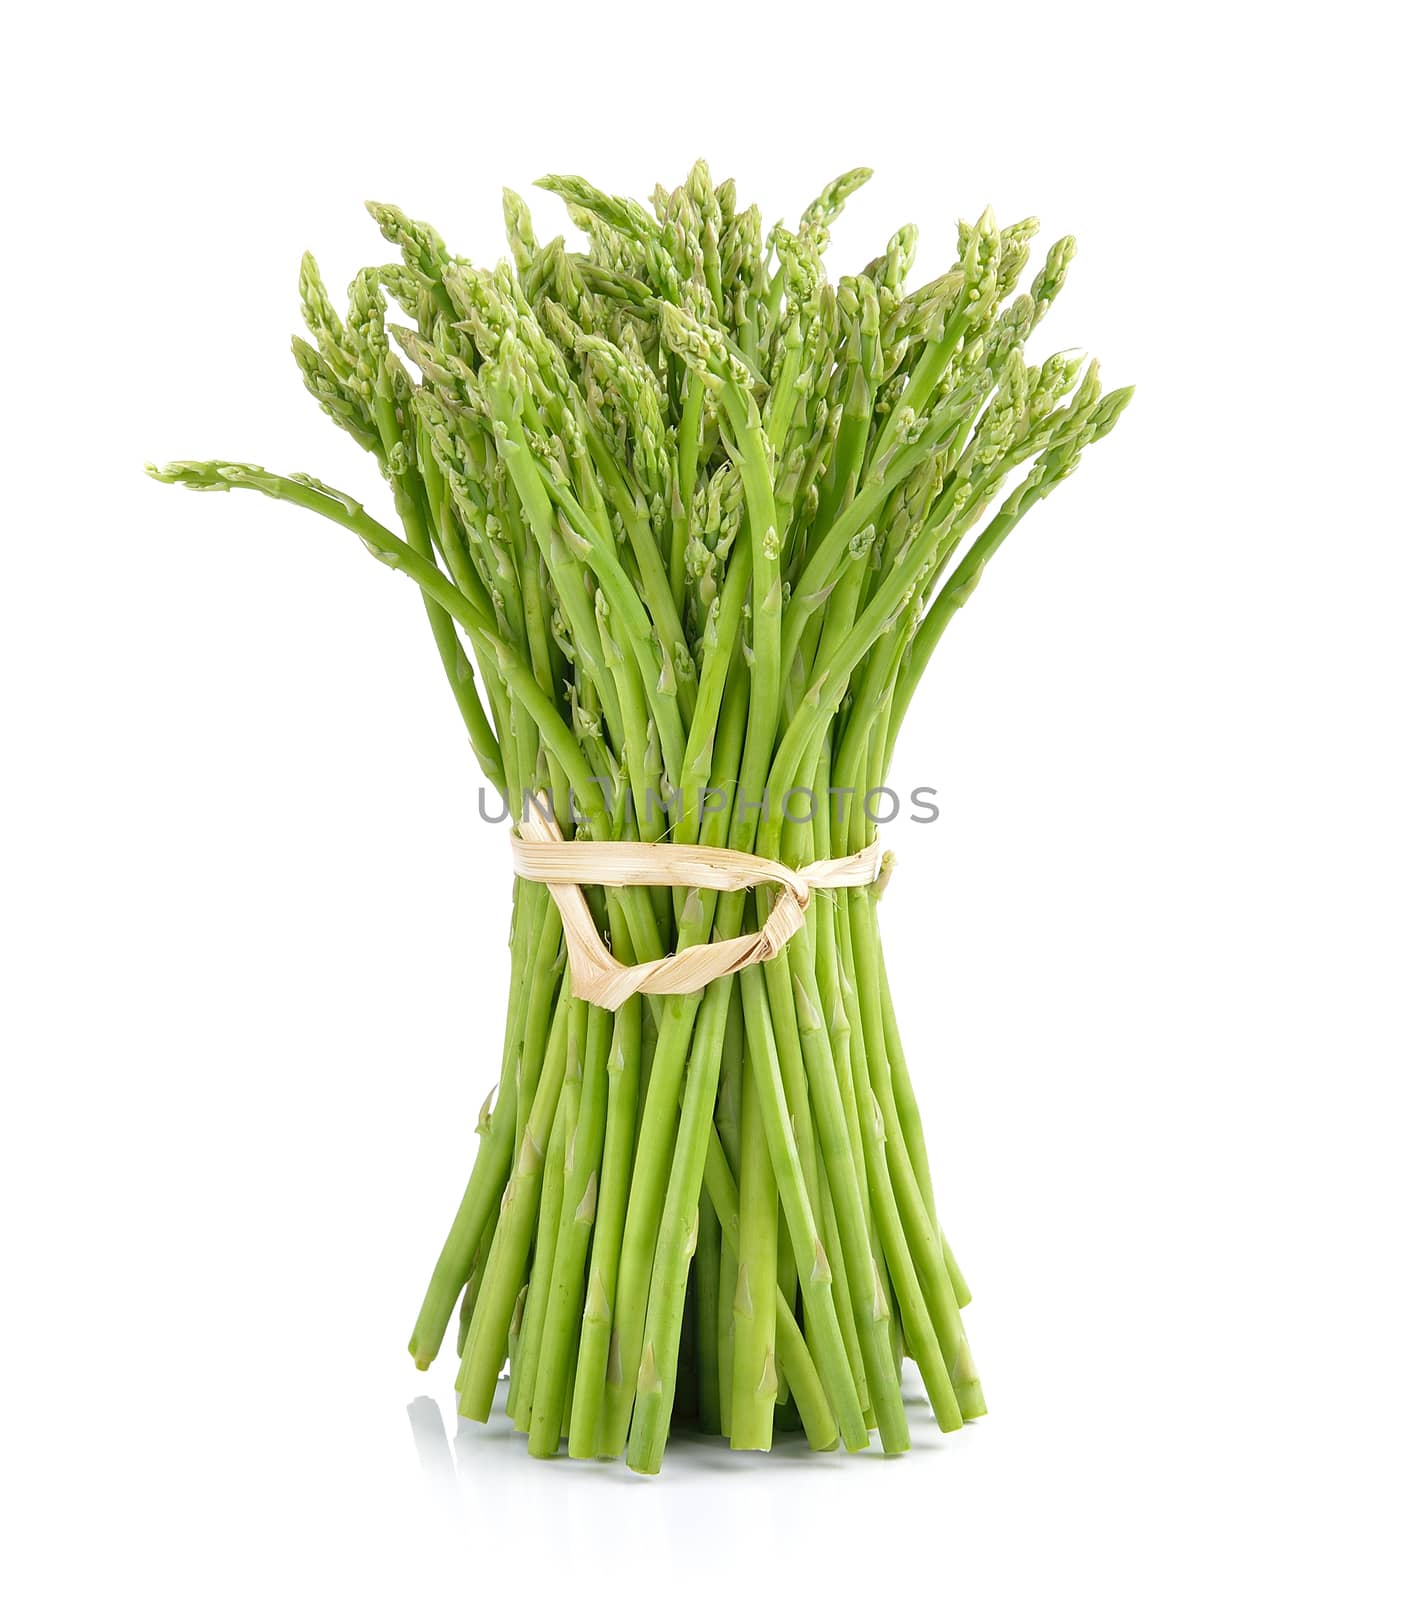 asparagus on white background by sommai